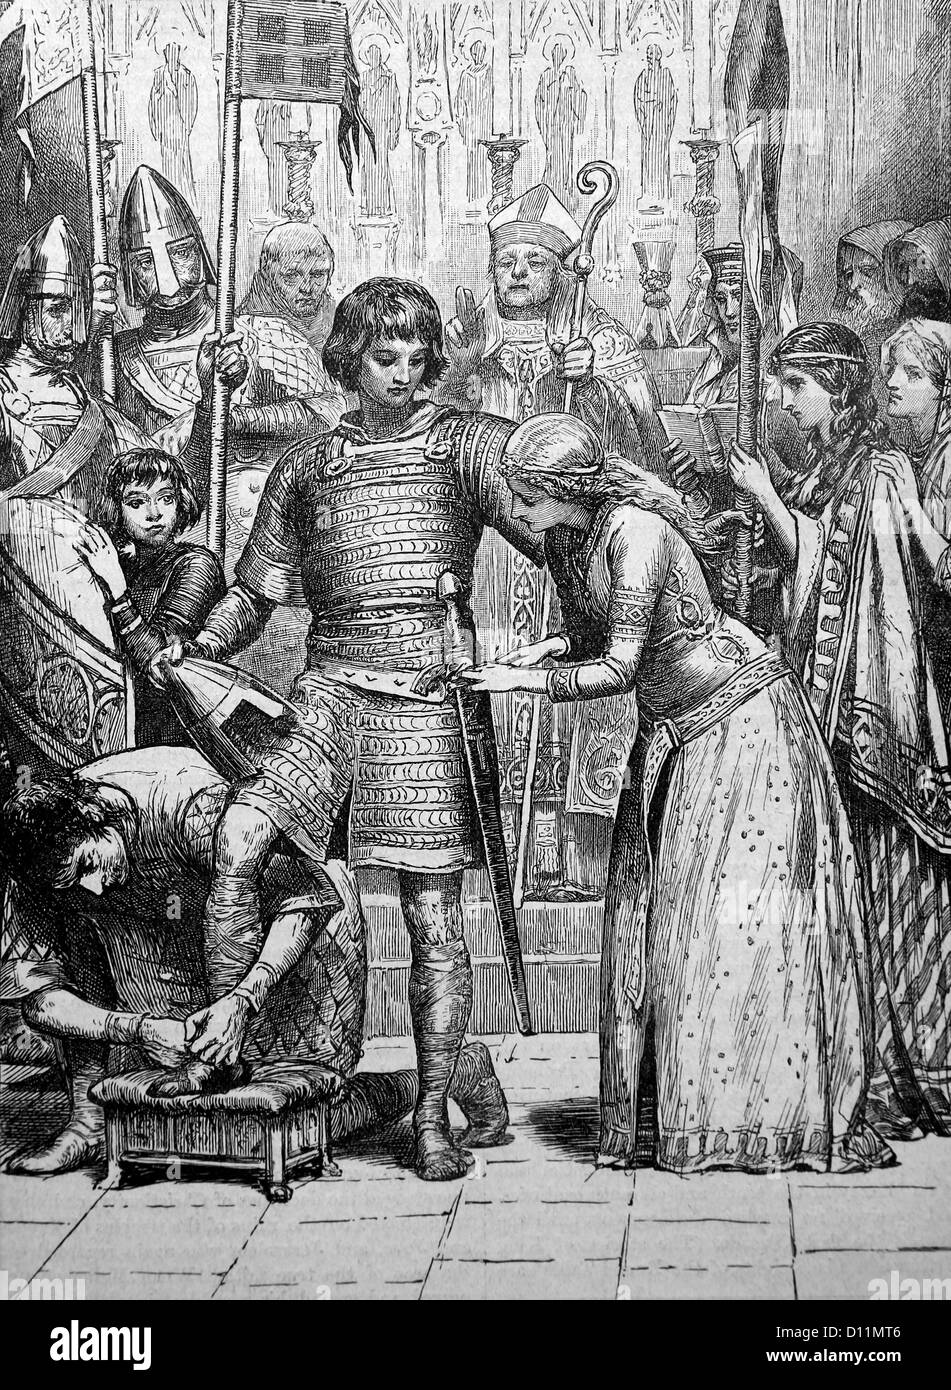 Illustration Of Initiation Into The Order Of Knighthood A Man Buckles On The Spurs And A Lady Armed The Knight Stock Photo